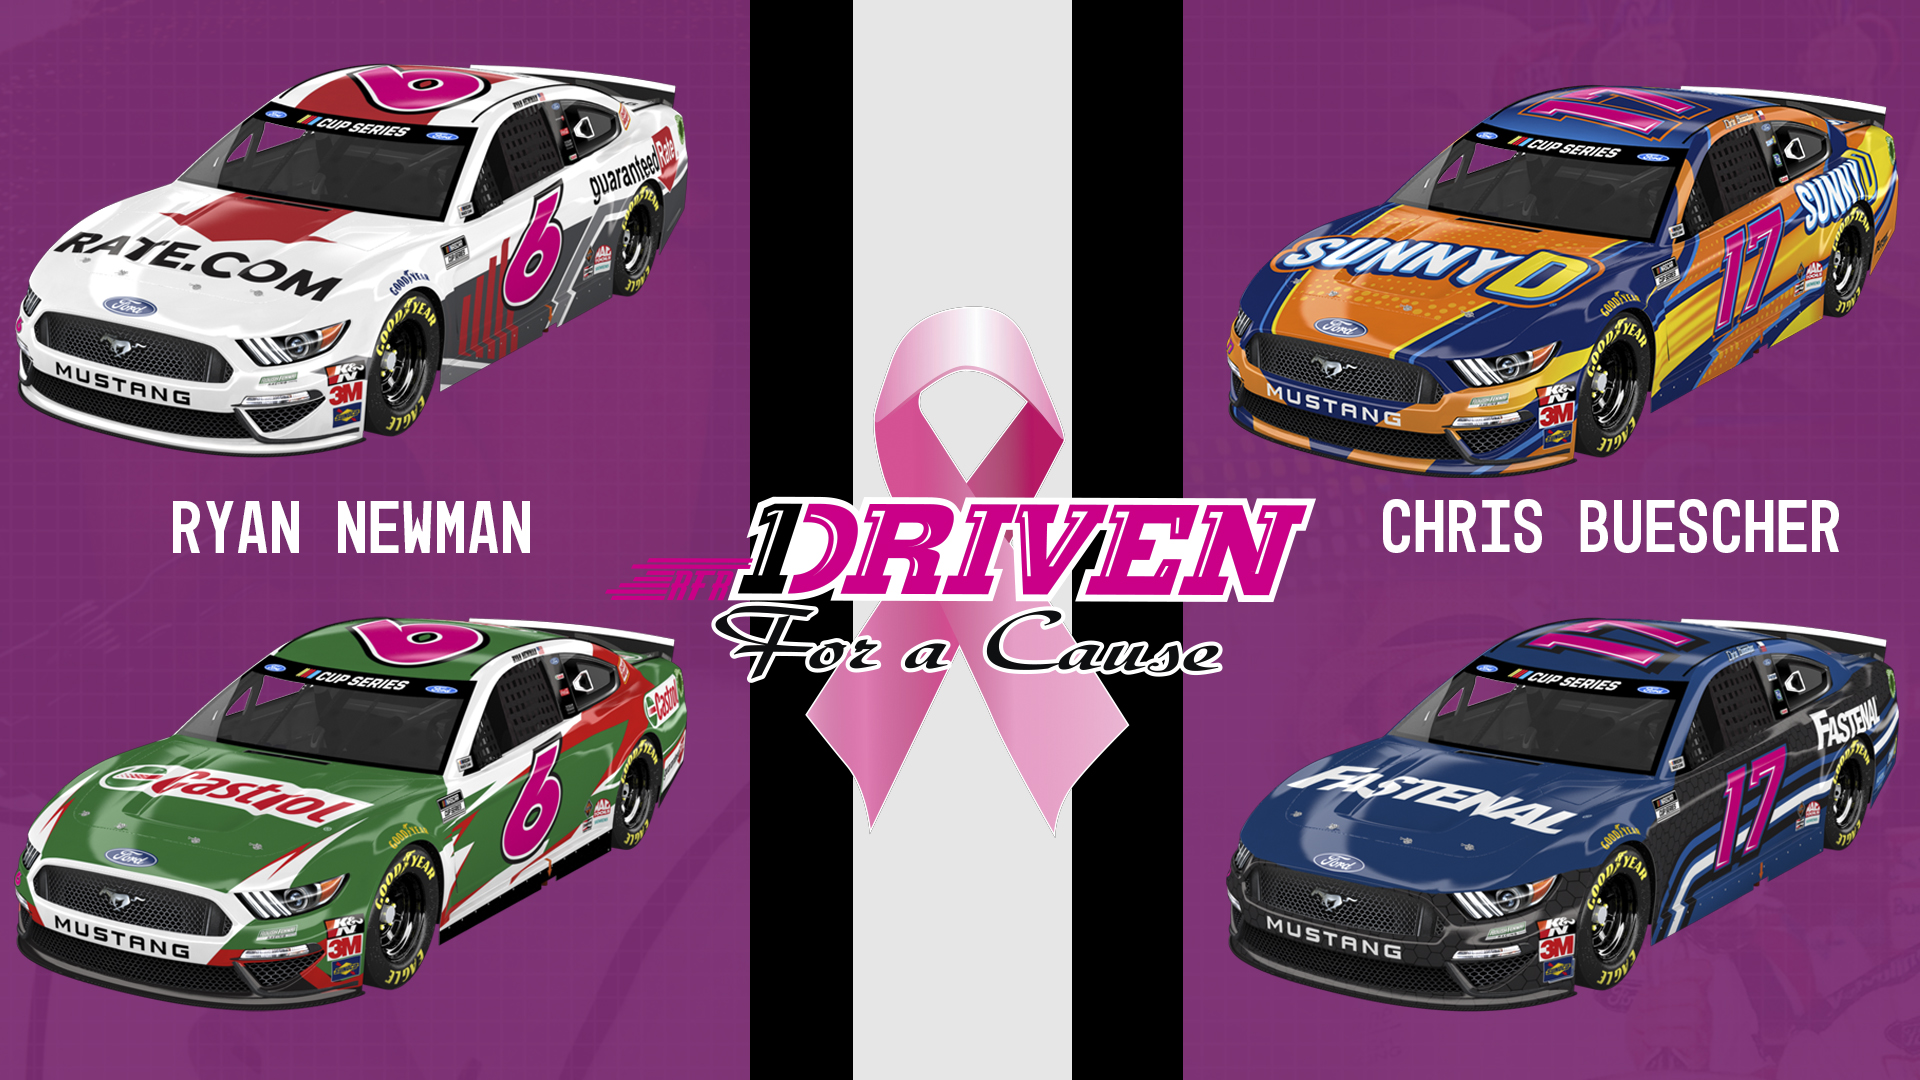 Roush Fenway Racing Goes Pink in October